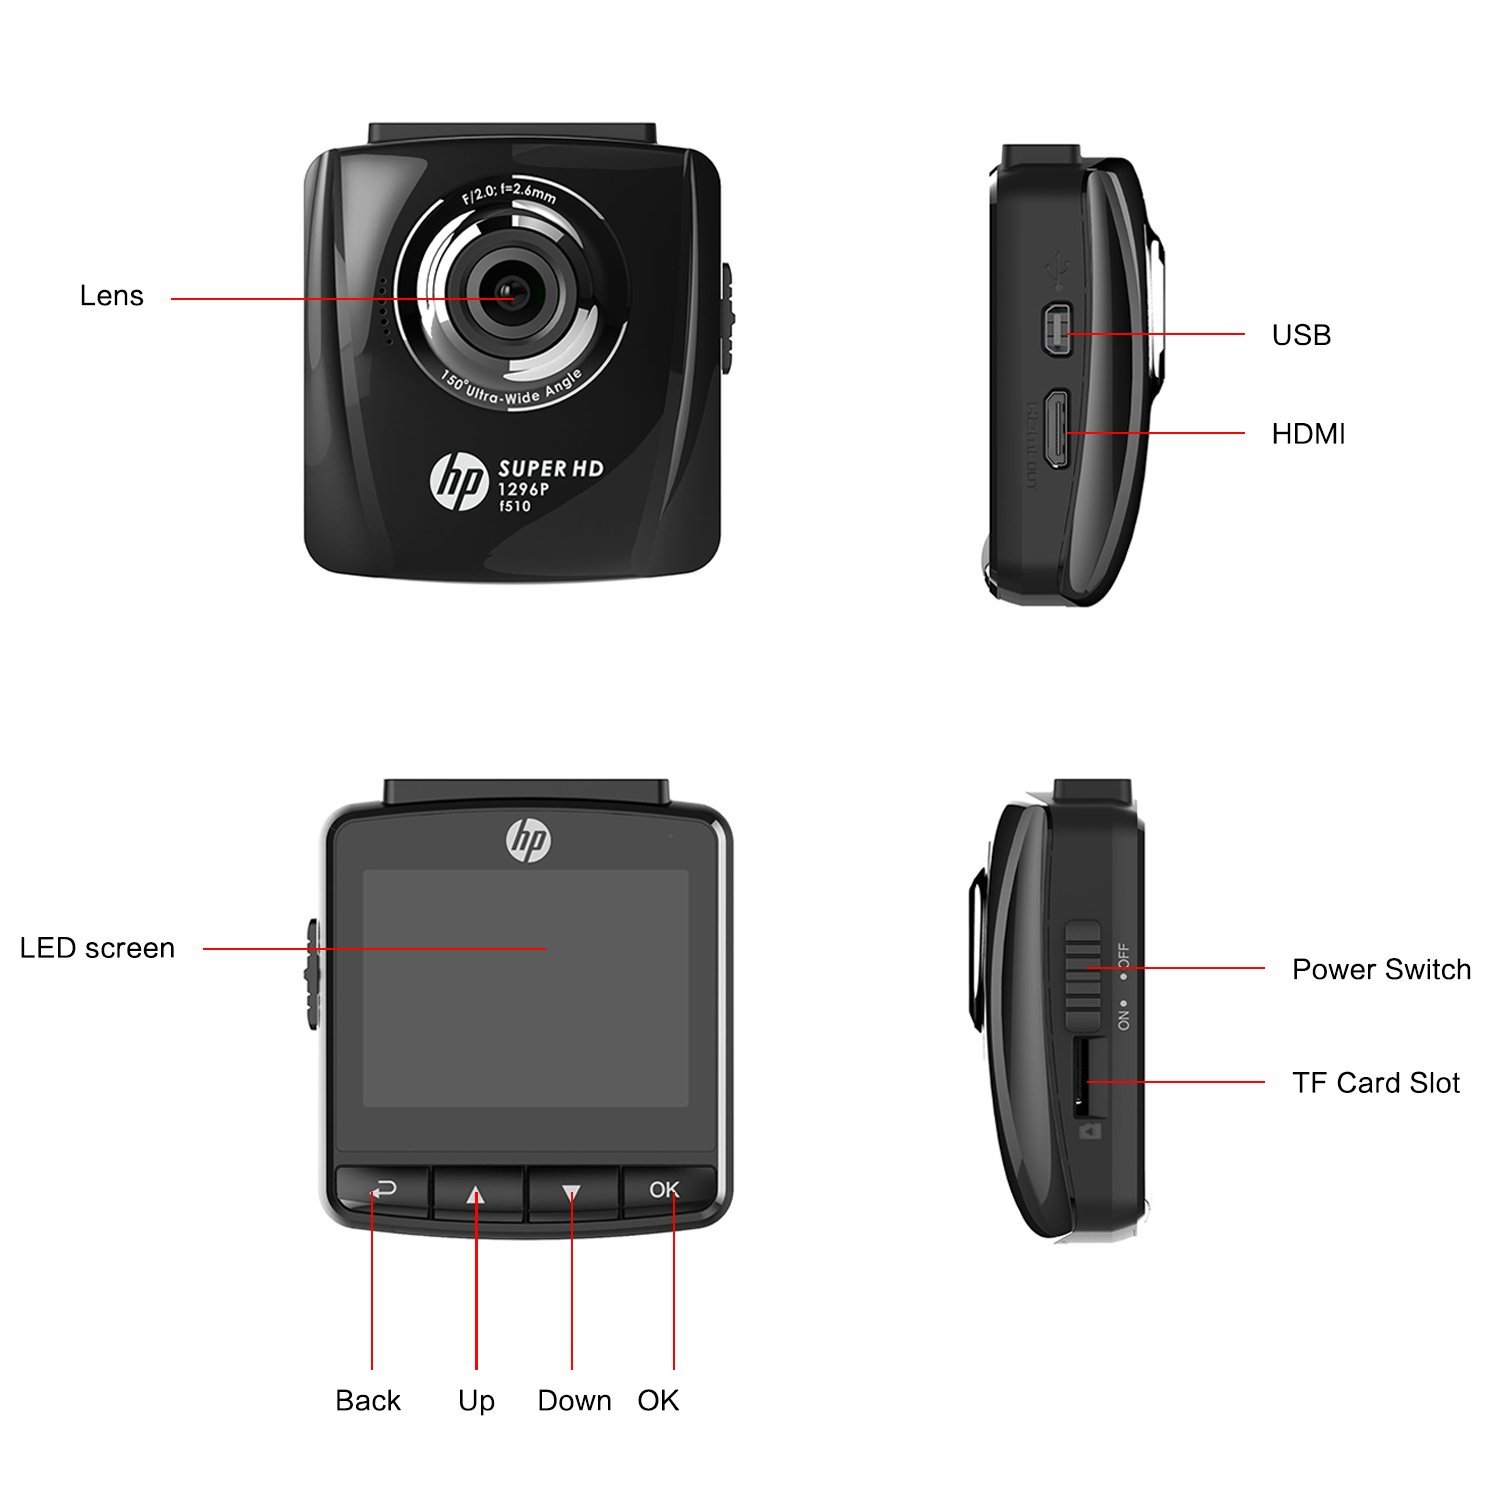 HP Super HD 1296p In Car Dash Cam Camera DVR Digital Driving Video Recorder High Definition 2304x1296 Pixels Resolution Increased by 44% Compared with 1080p 6